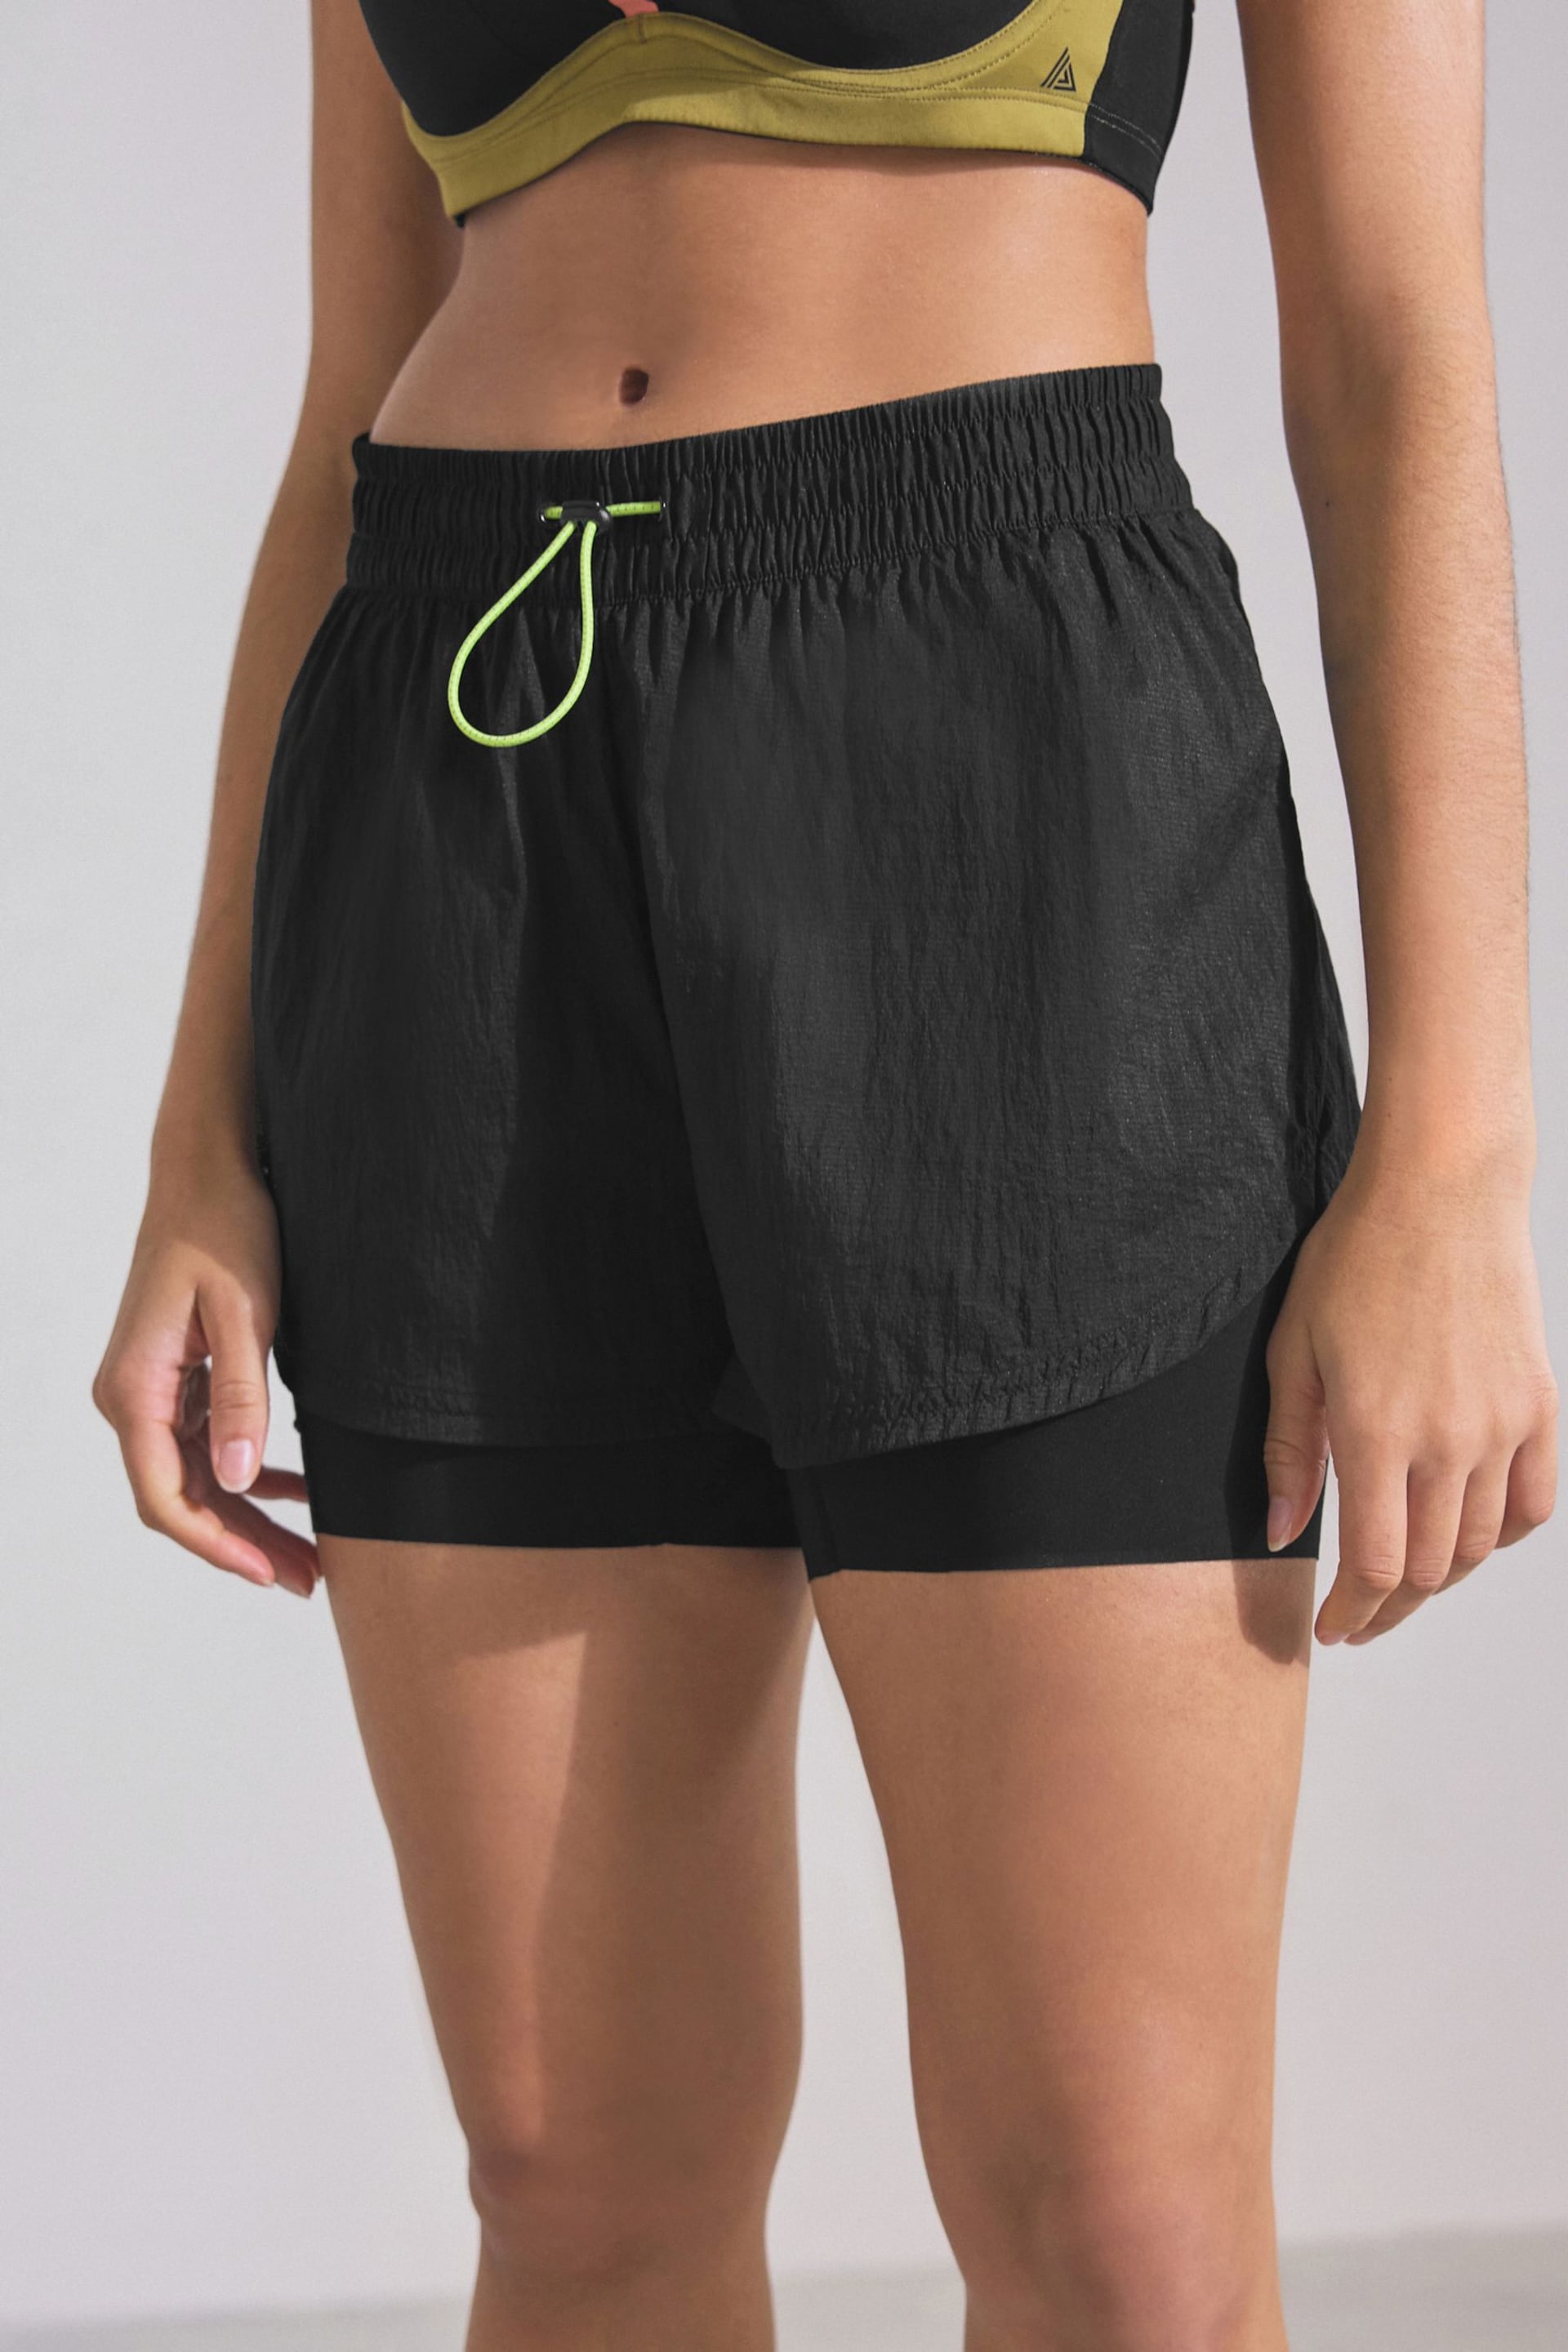 Black High Waisted 2-in-1 Sport Shorts - Image 4 of 7